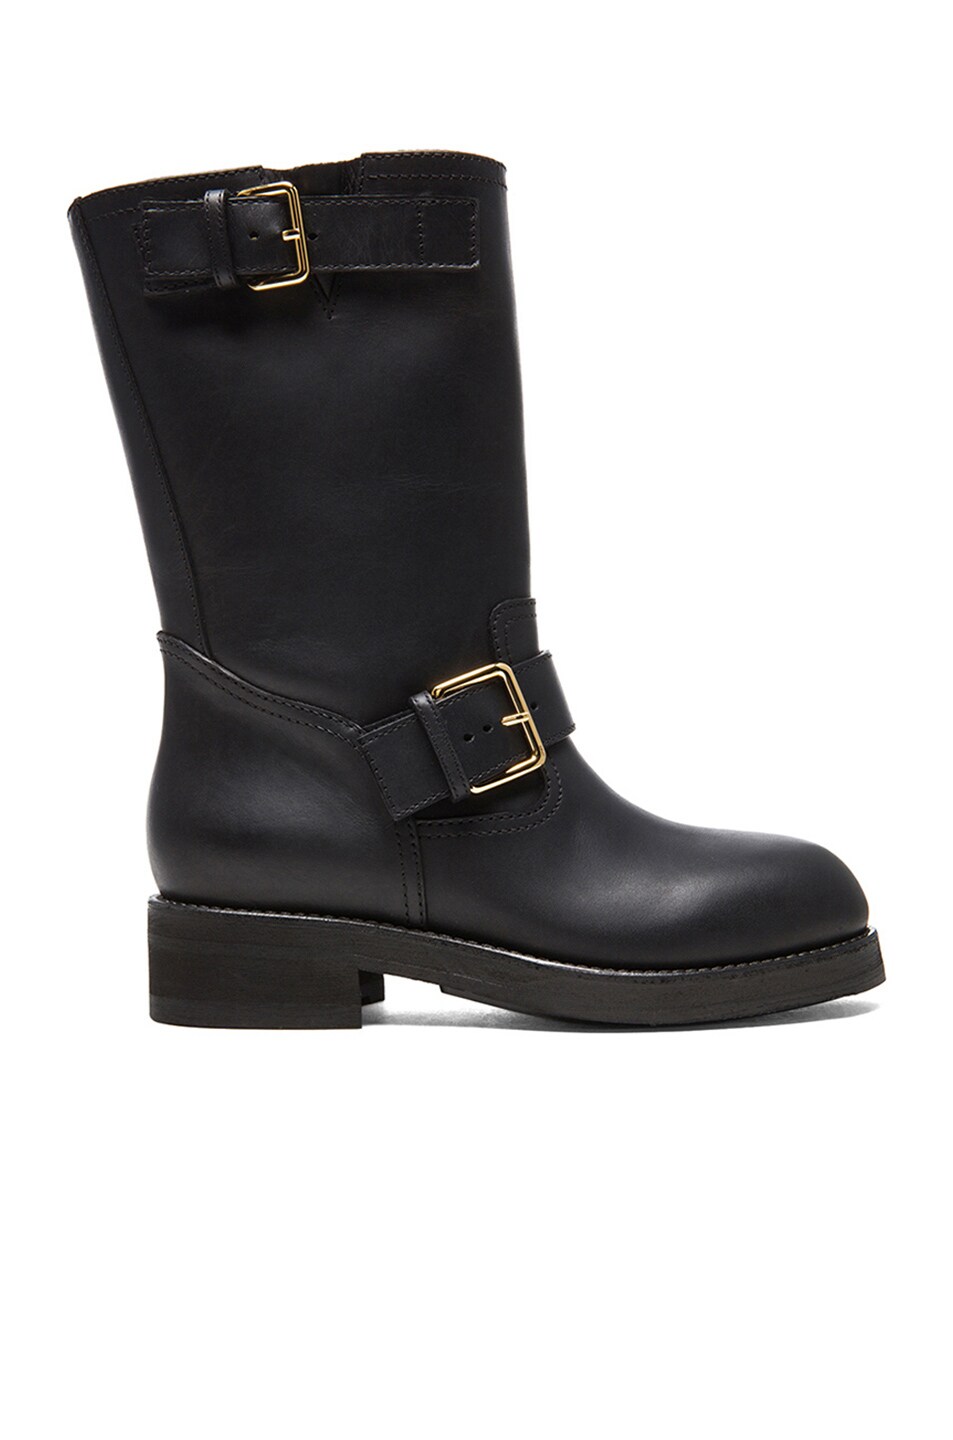 Image 1 of Marni Moto Leather Boots in Coal